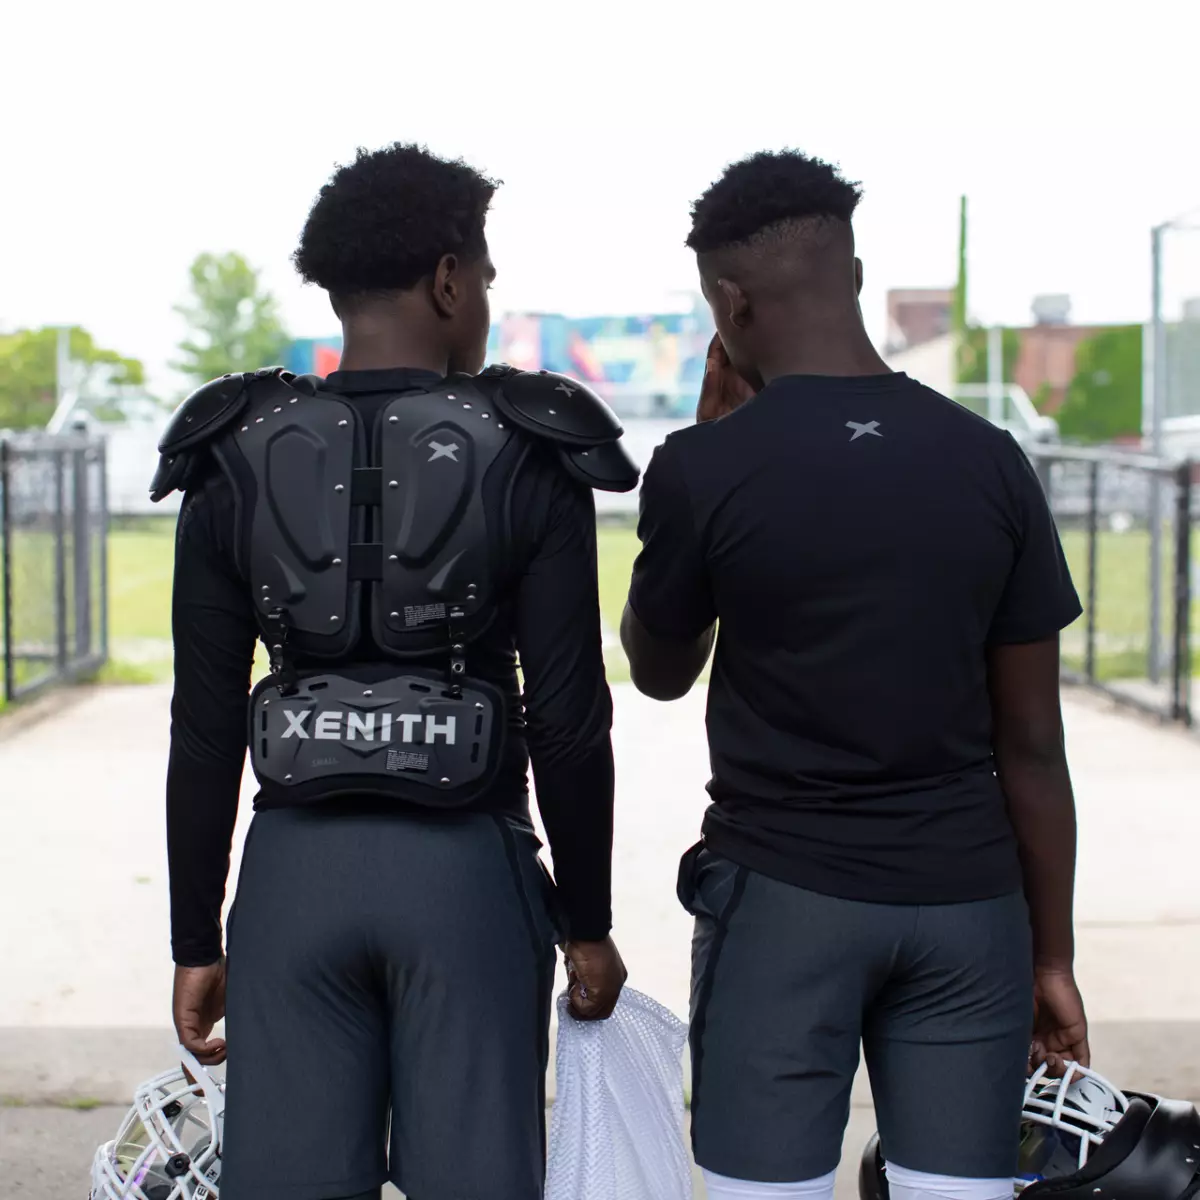 Two athletes facing away from the camera wearing Xenith football gear.